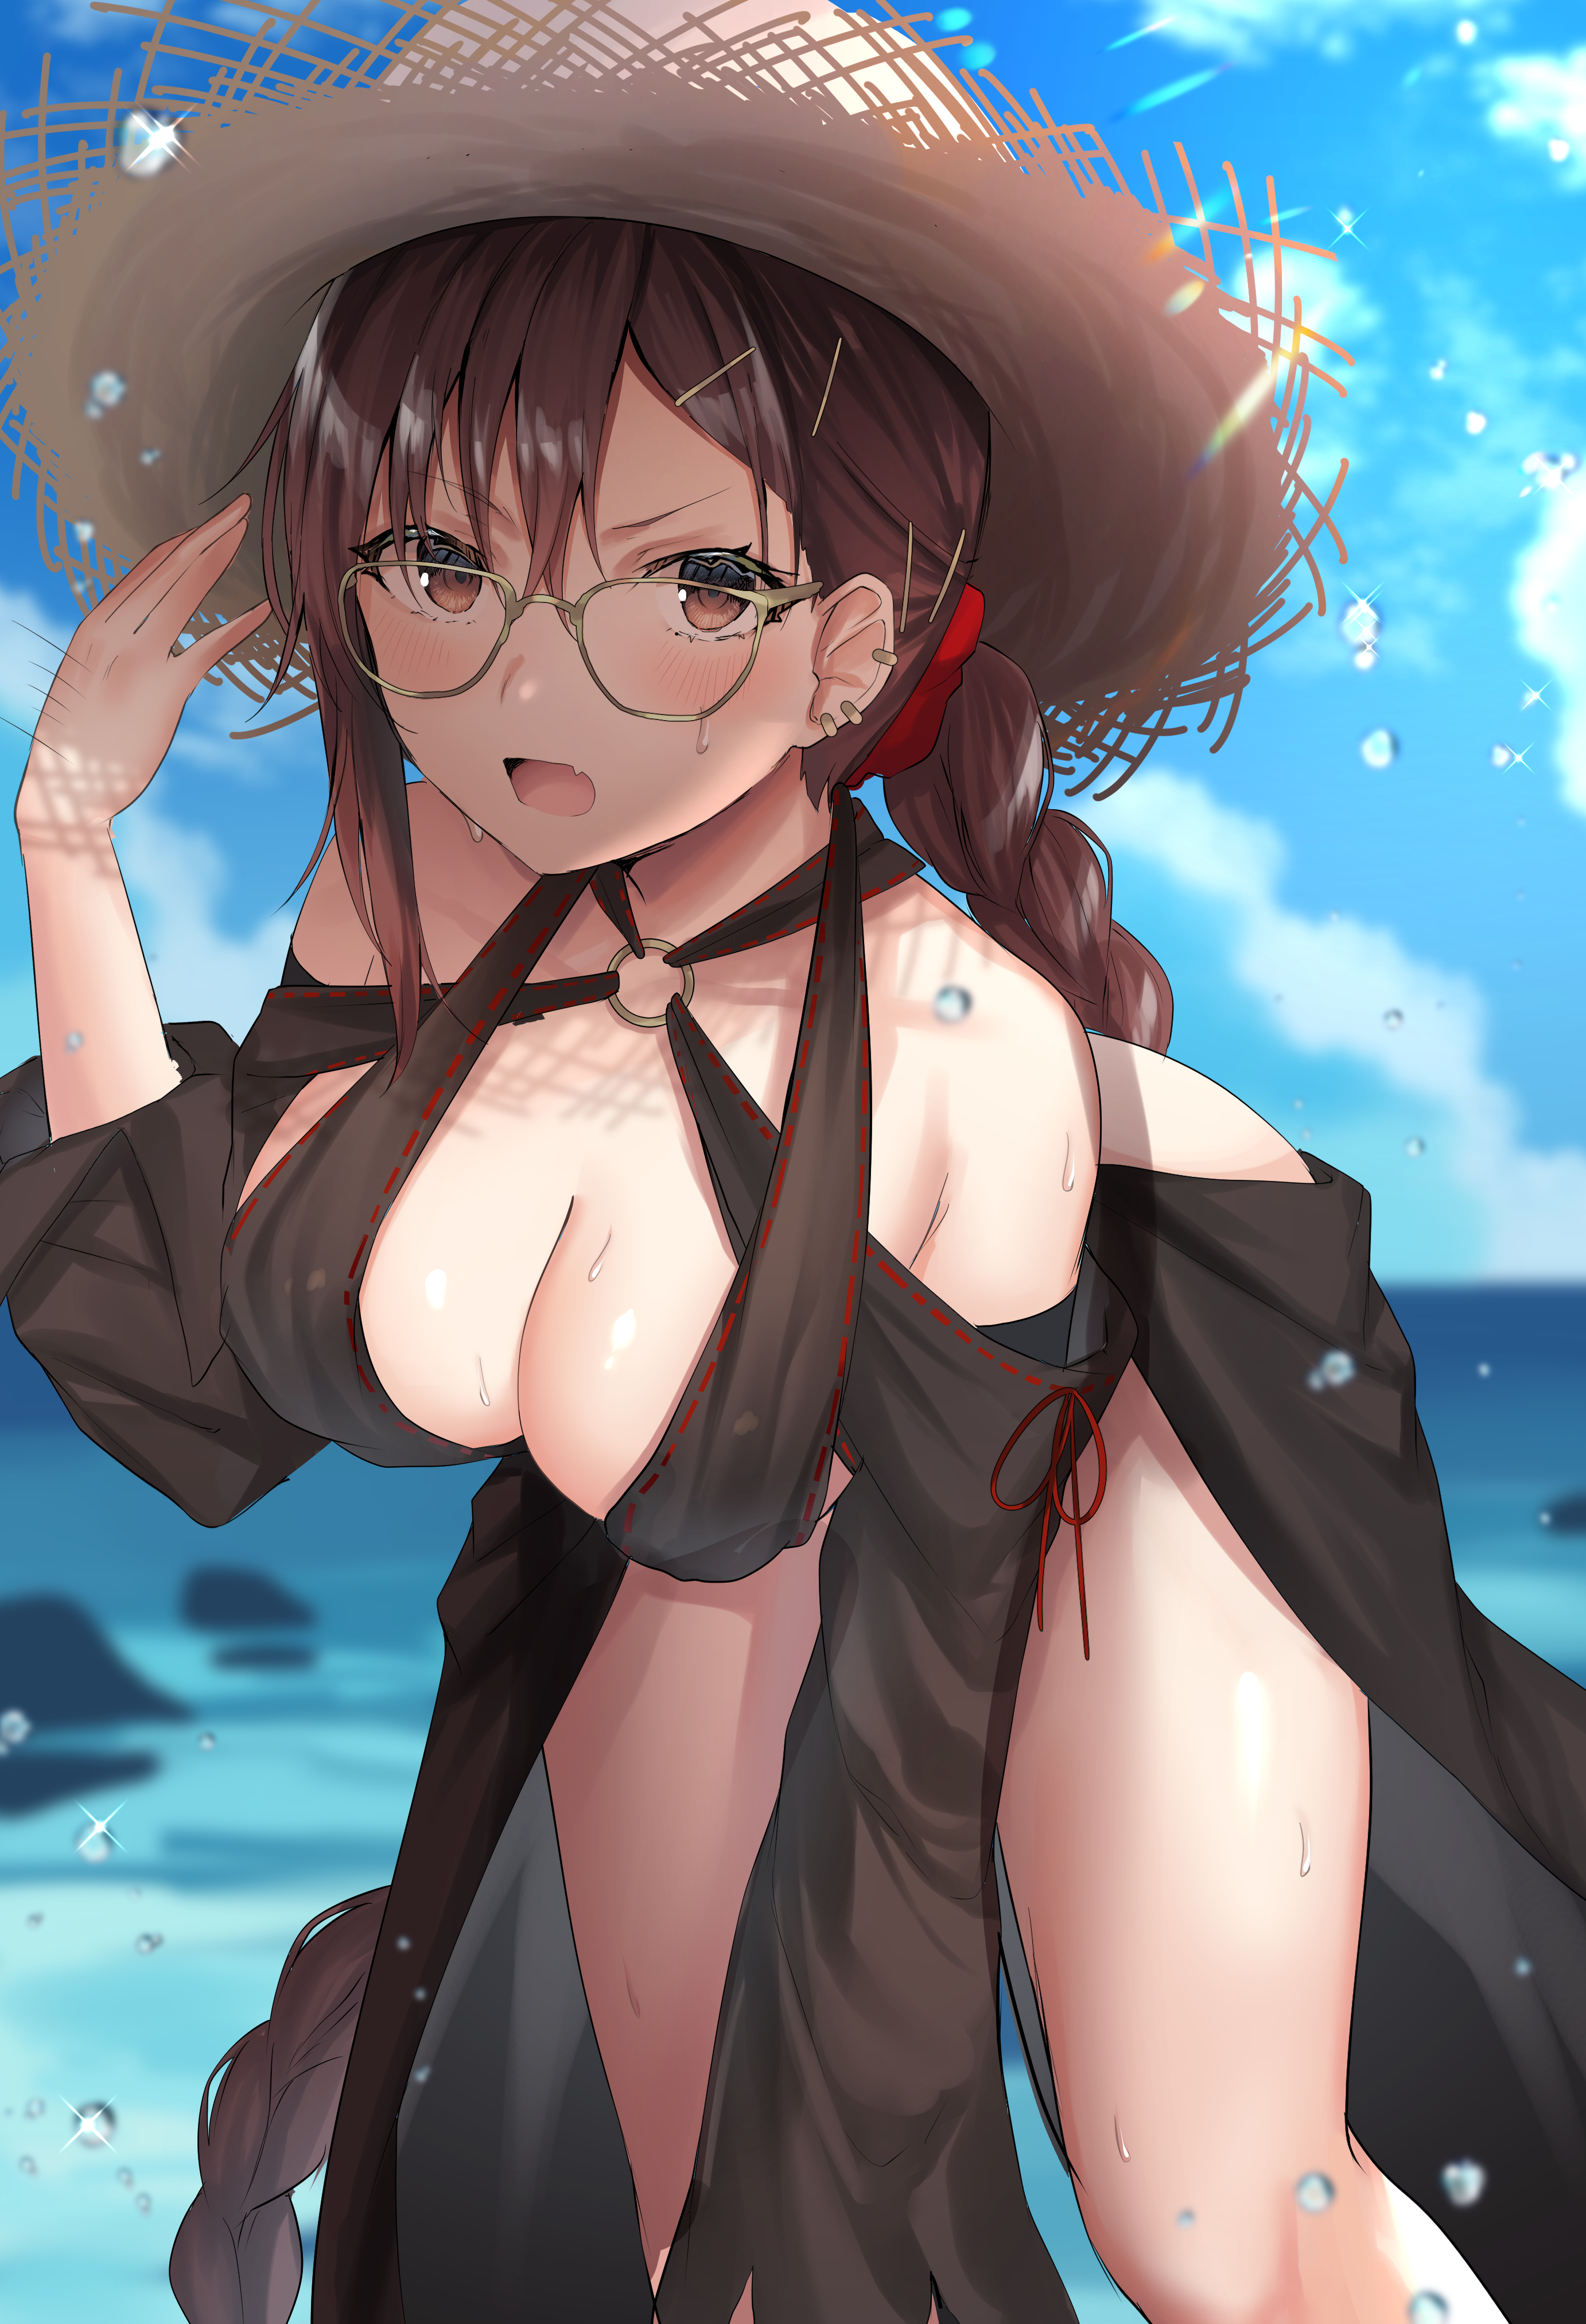 Anime 2764x4050 anime anime girls digital art artwork 2D portrait display Ssqseeker Fate series Fate/Grand Order Consort Yu (Fate/Grand Order) straw hat glasses brunette braids brown eyes blushing bent over cleavage